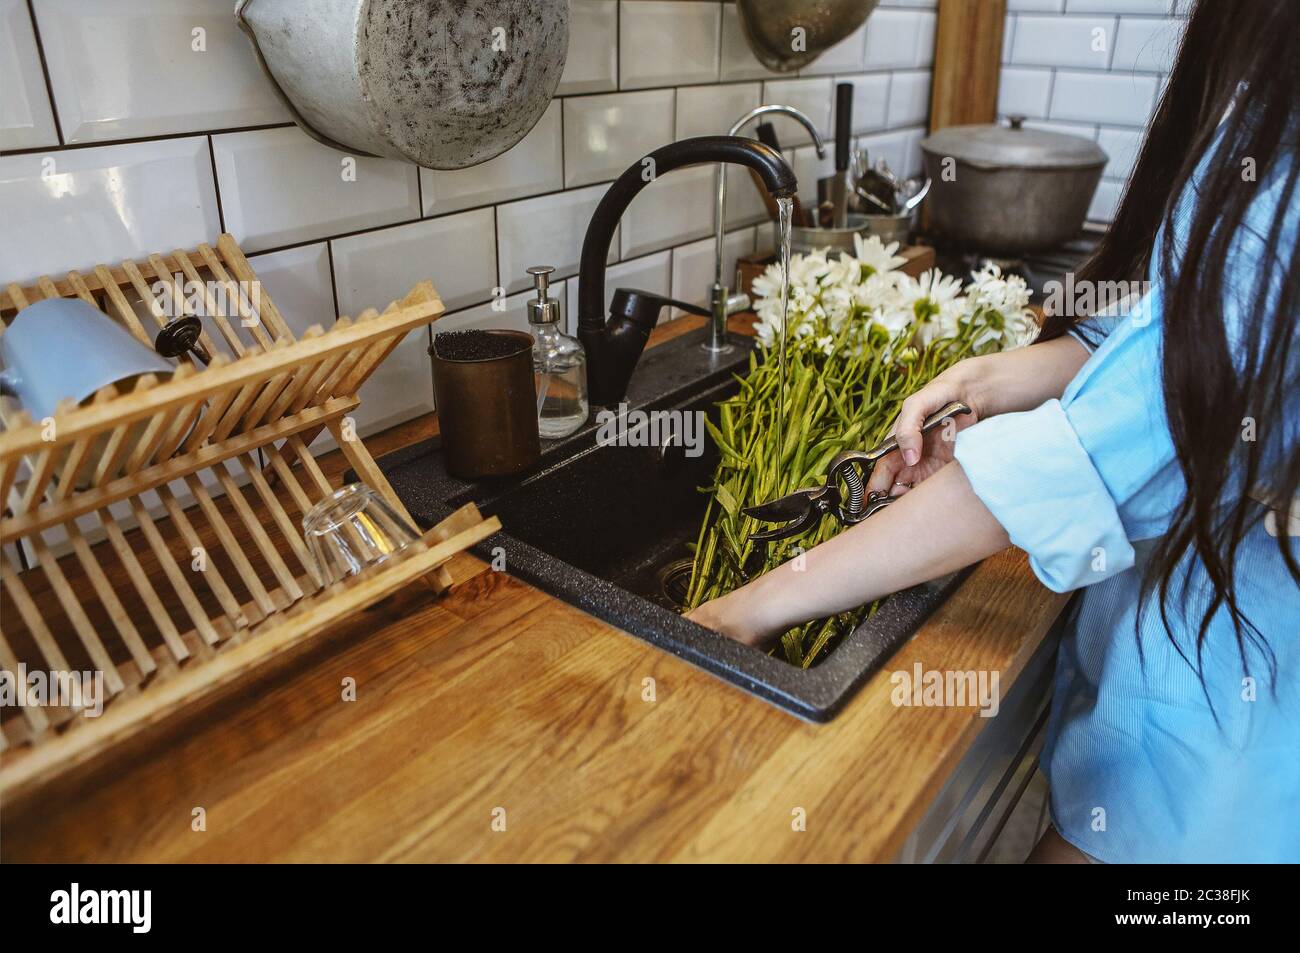 Crop woman cutting flowers in sink Stock Photo